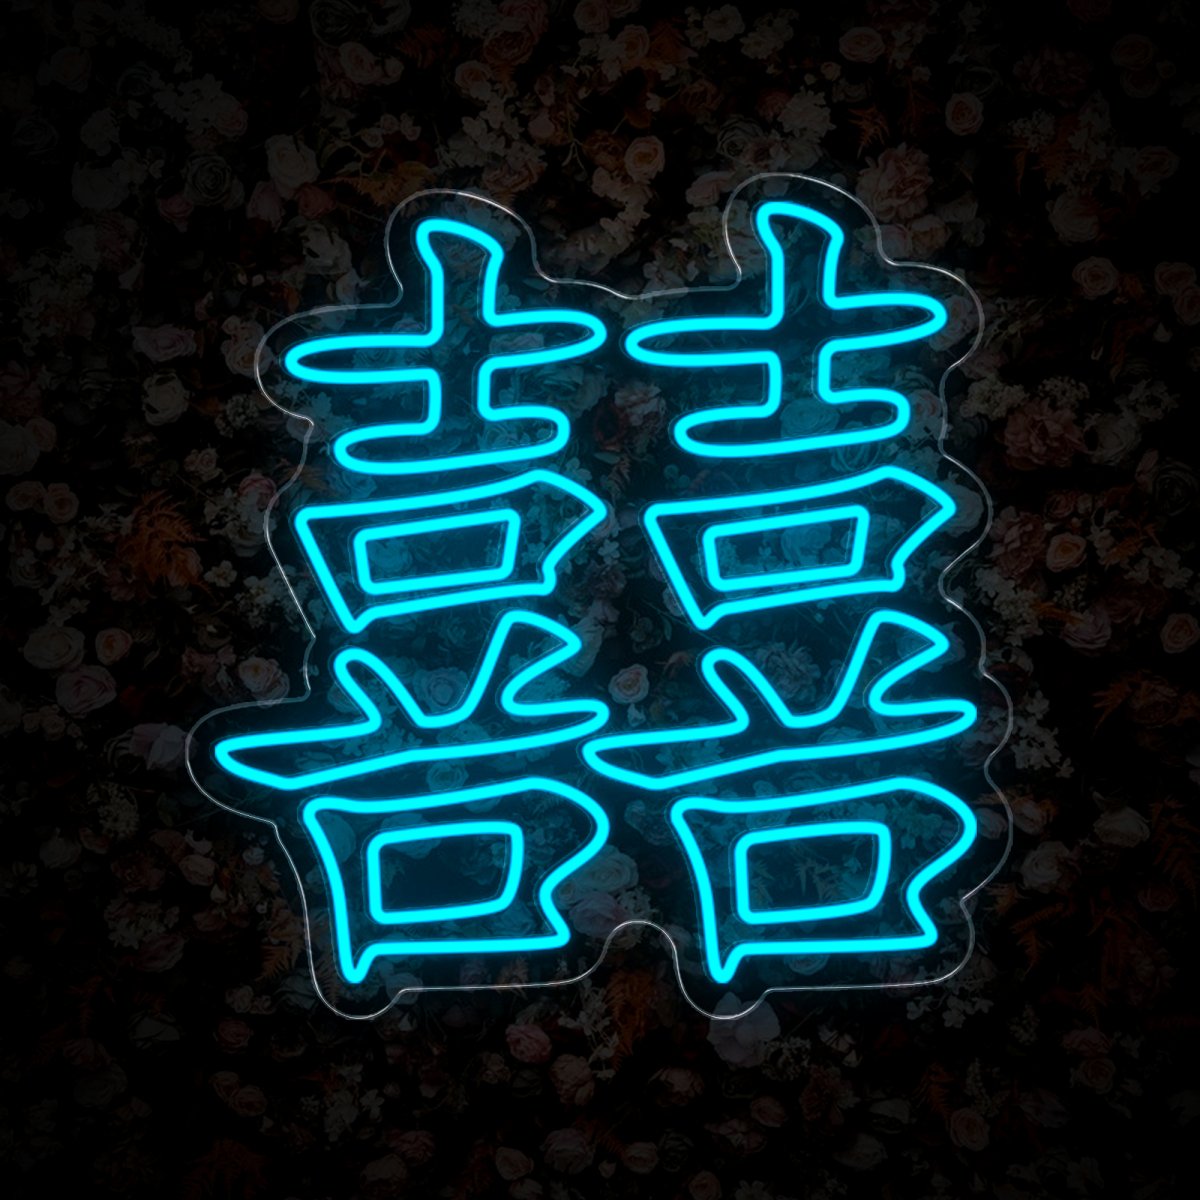 Chinese Double Happiness Wedding Neon Sign - Reels Custom